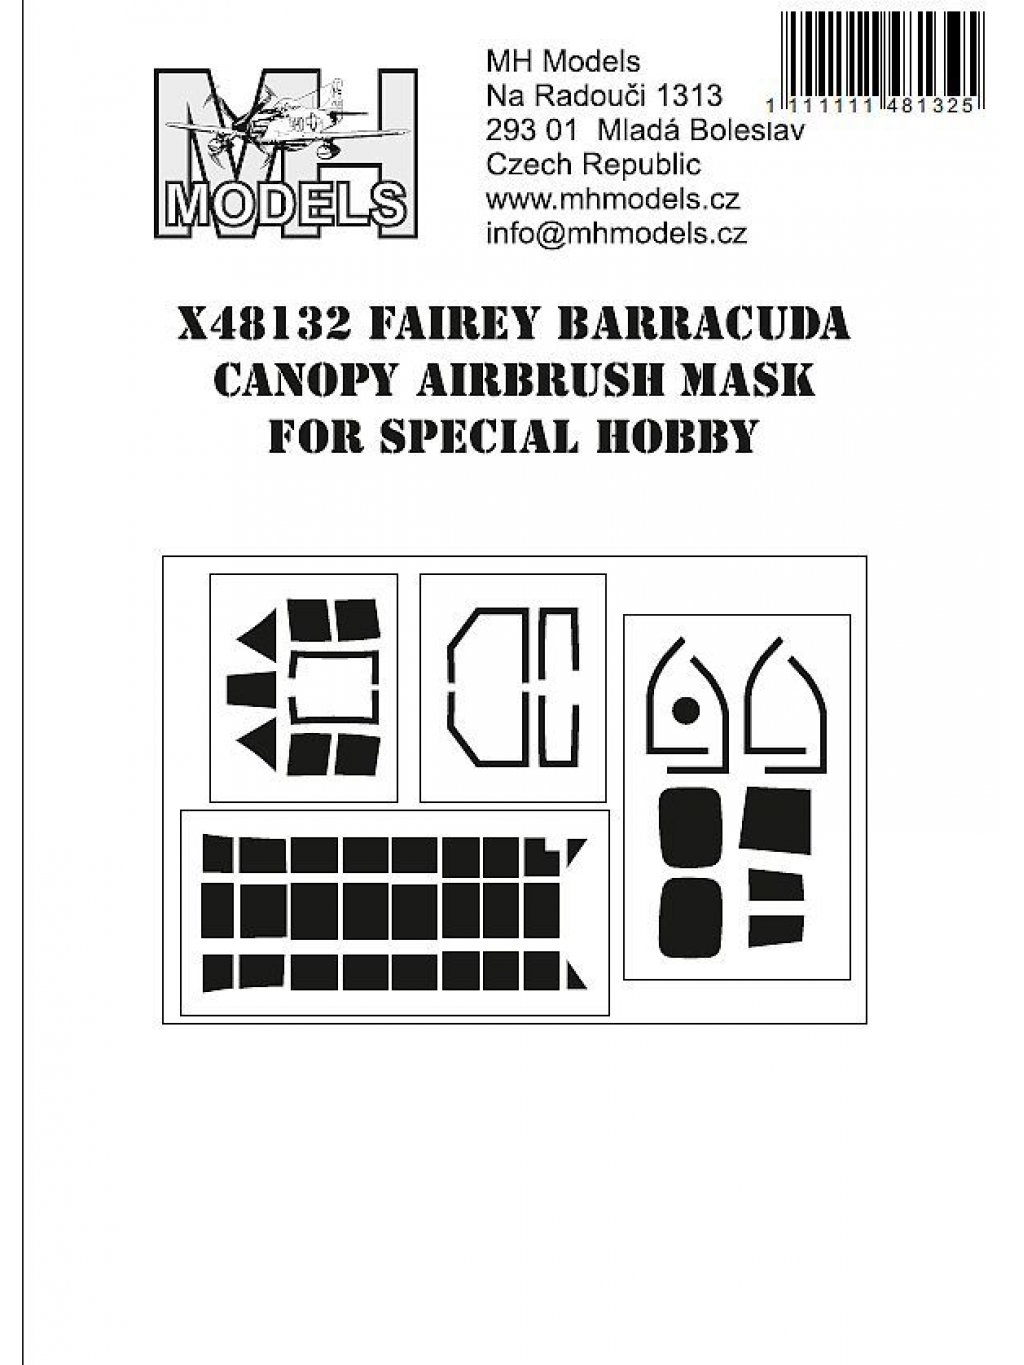 Fairey Barracuda canopy airbrush mask for Special Hobby